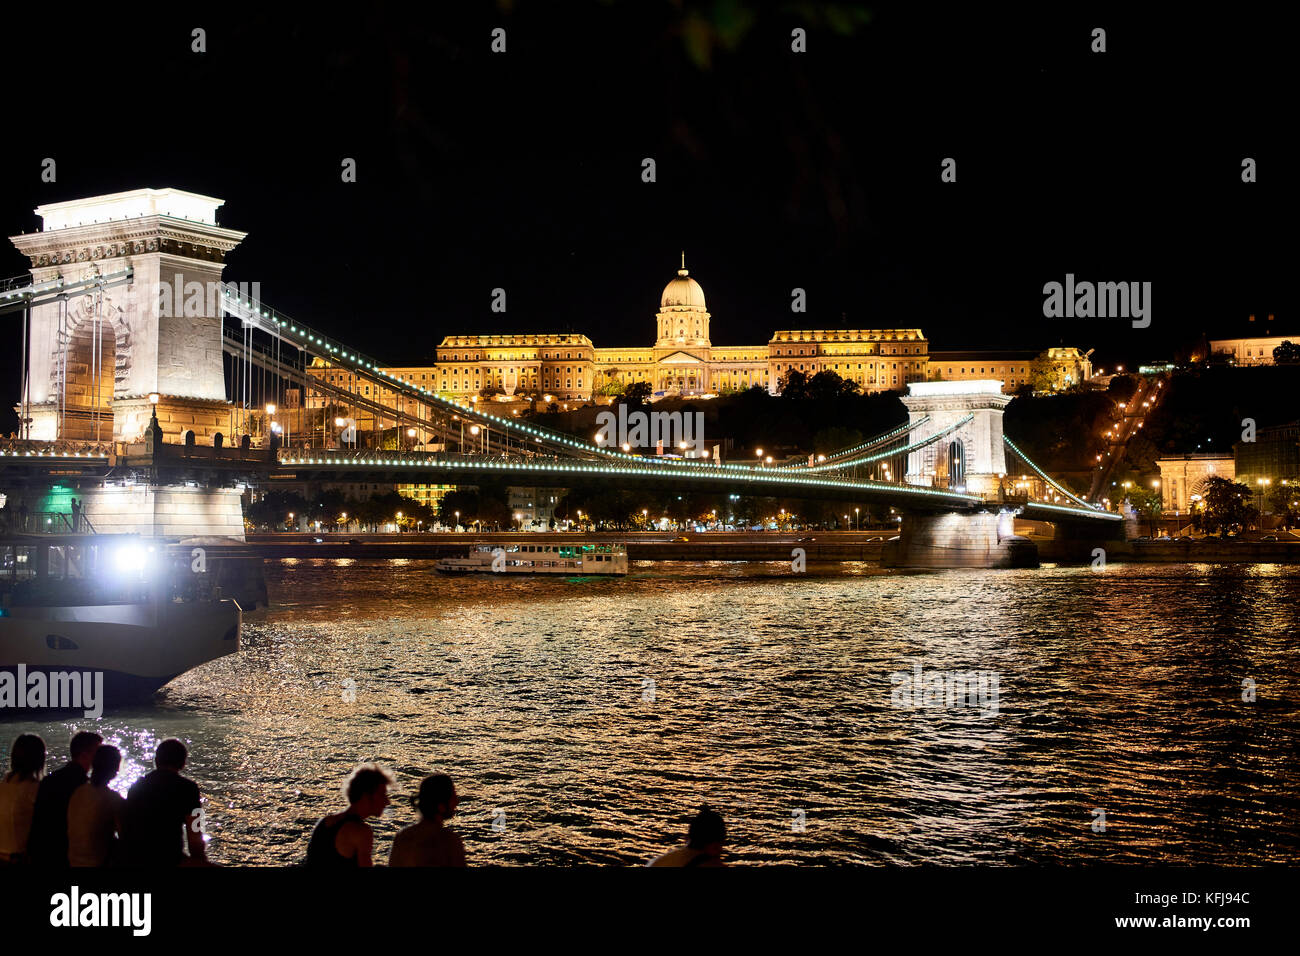 View of Buda castle Budapest with the chain link bridge Széchanyi Lánchid and river Danube in the foreground; taken at night Stock Photo